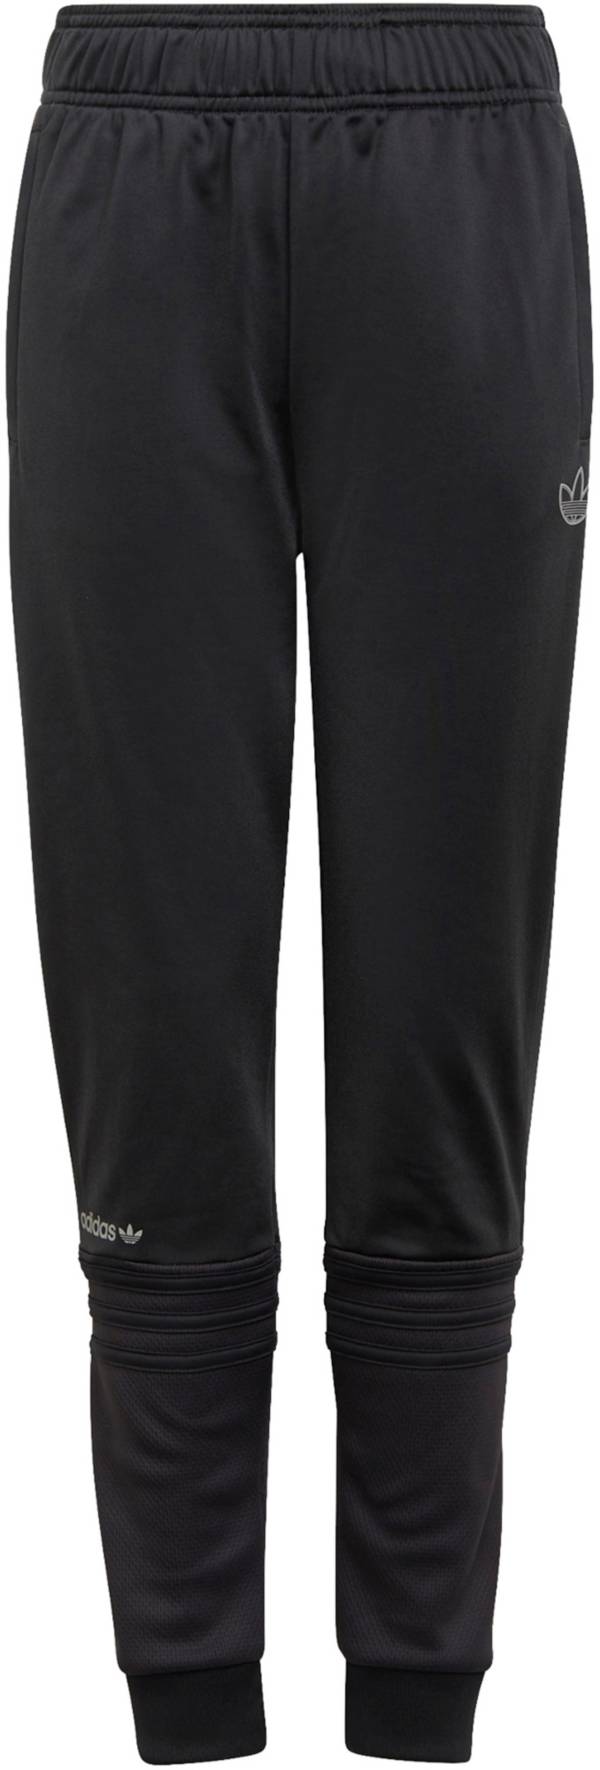 adidas Boys' SPRT Collection Track Pants product image